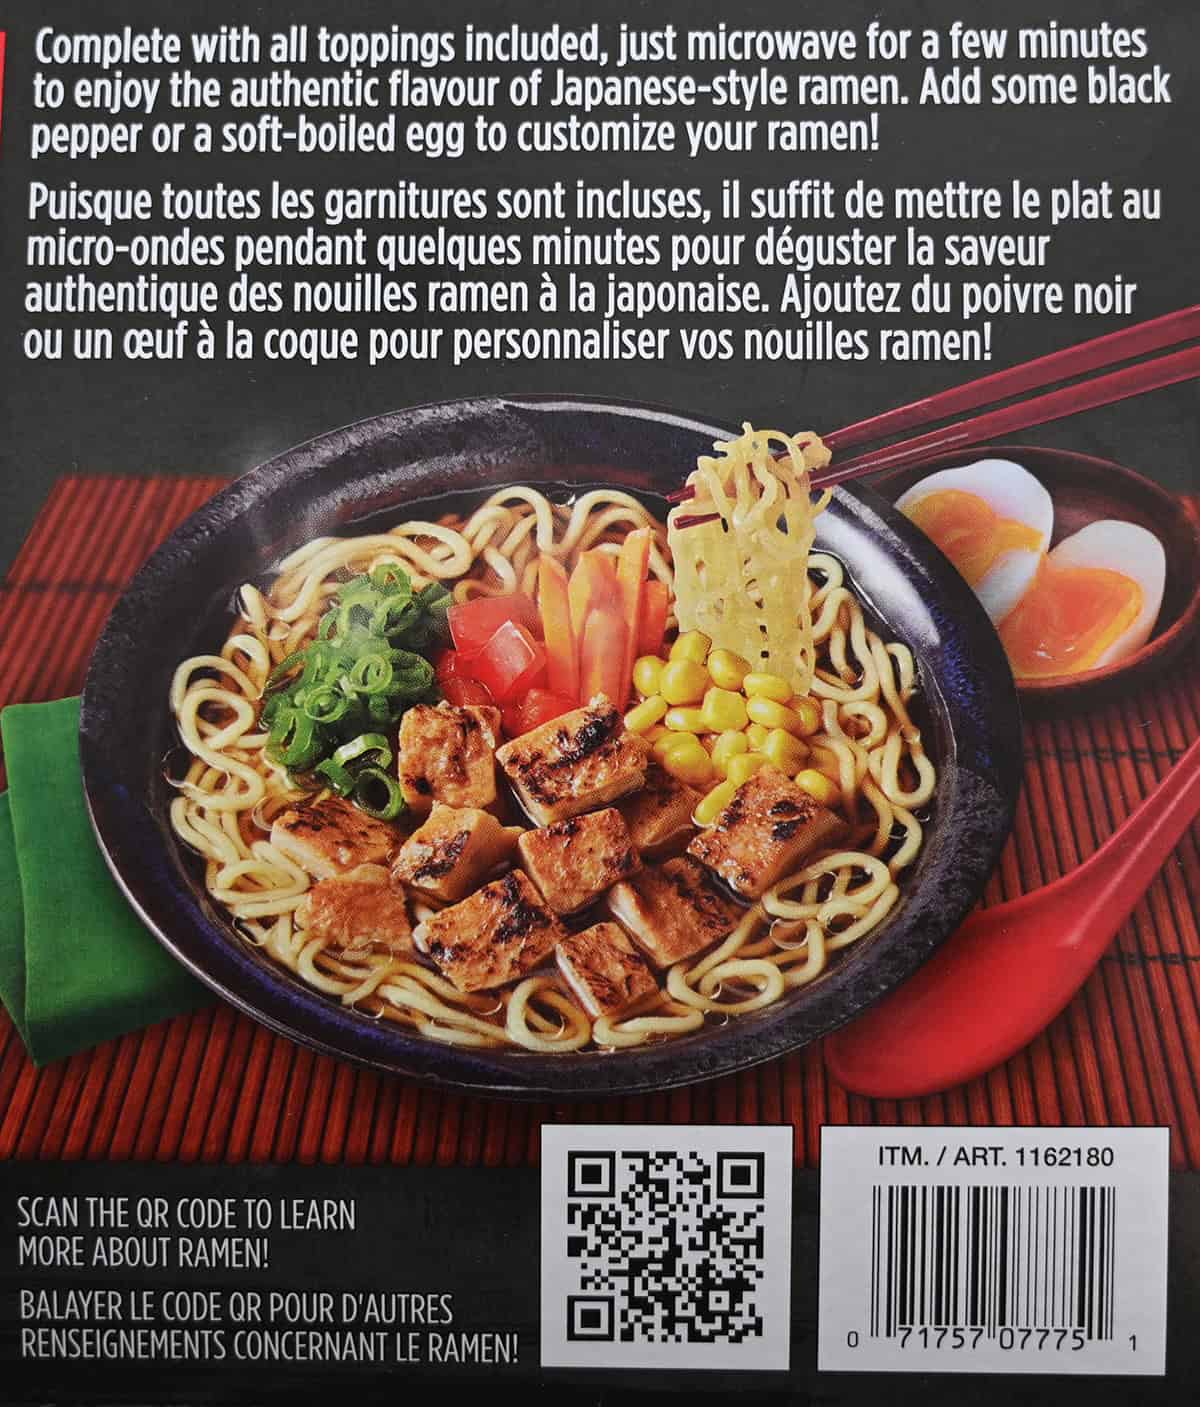 Image of the back of the ramen box showing the product description.